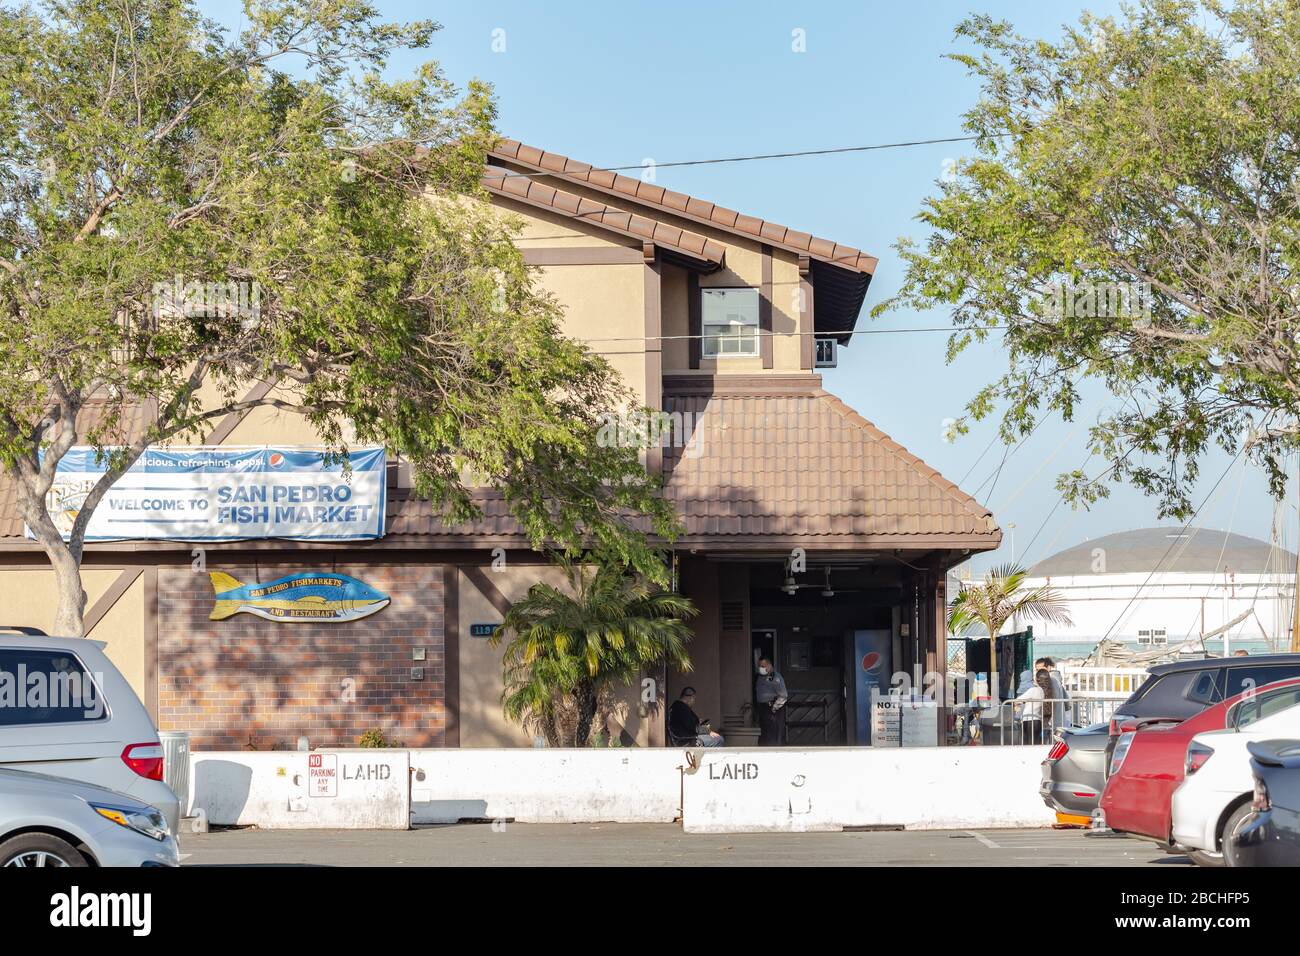 San Pedro Fish Market restaurant has long line of customers ordering take out during stay at home order on April 3, 2020 in San Pedro, CA Stock Photo